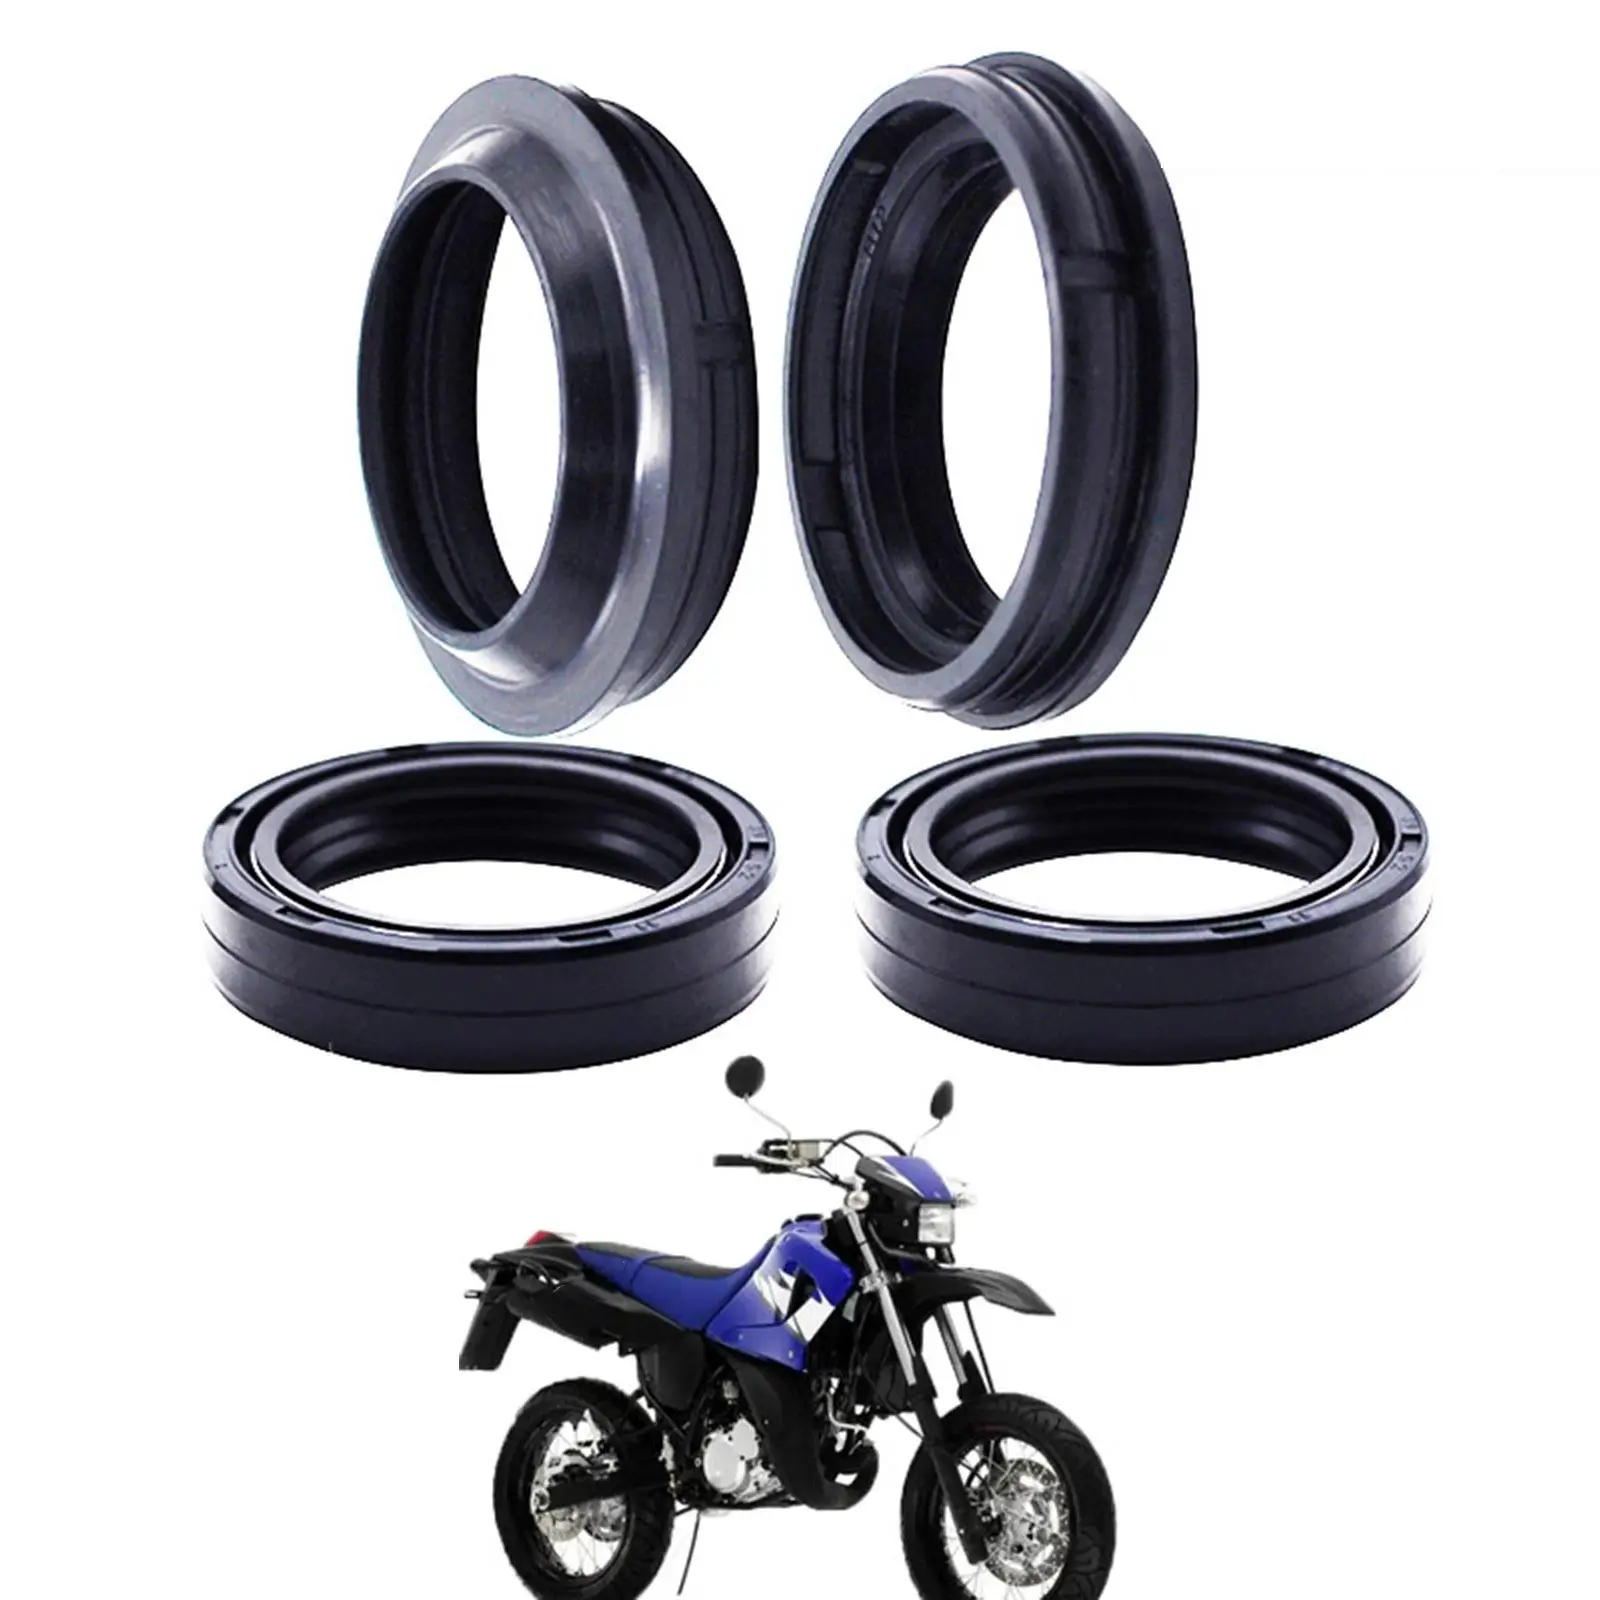 4x Motorcycle Front Fork Damper Oil Seal and Dust Seal Rubber 36x48x11mm for Yamaha XT 125 R Bra 2007 XT 125 x Bra 2007